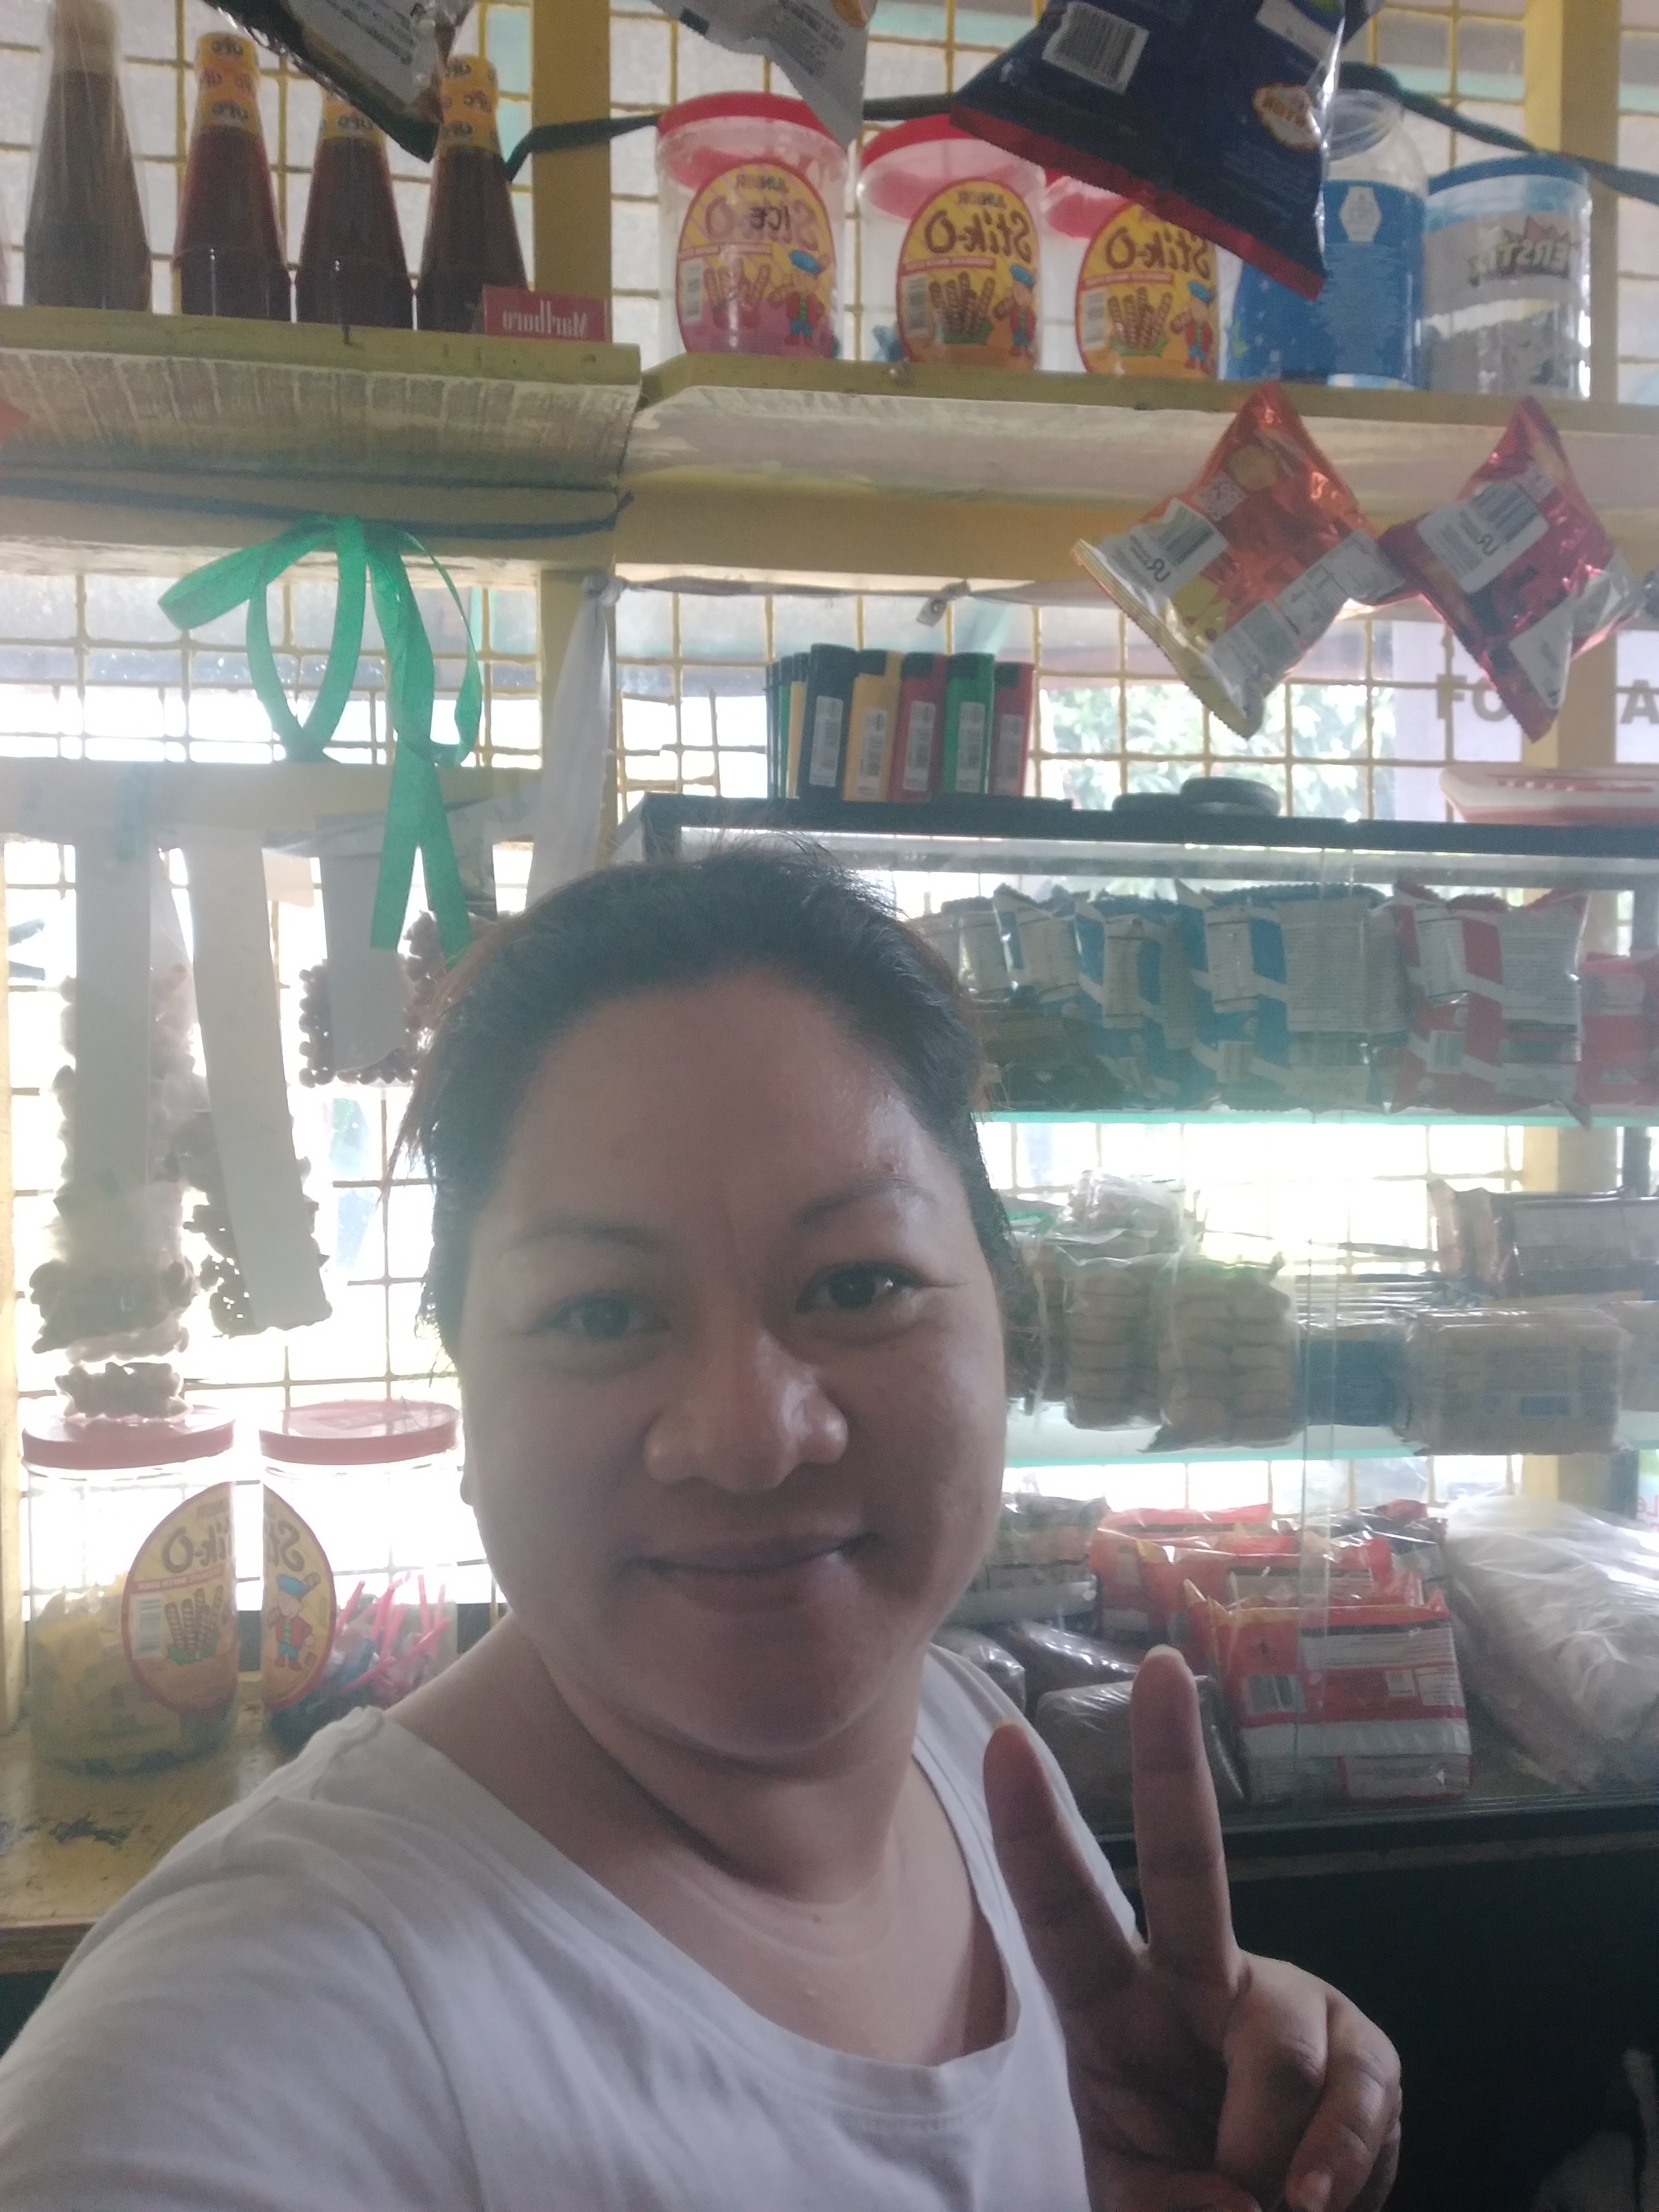 A.G.lucilacarandang Being in this guild made her really proud as she replenished her "sari-sari" store and her vegetable stand with fresh vegetables with the use of her hard earned salary.